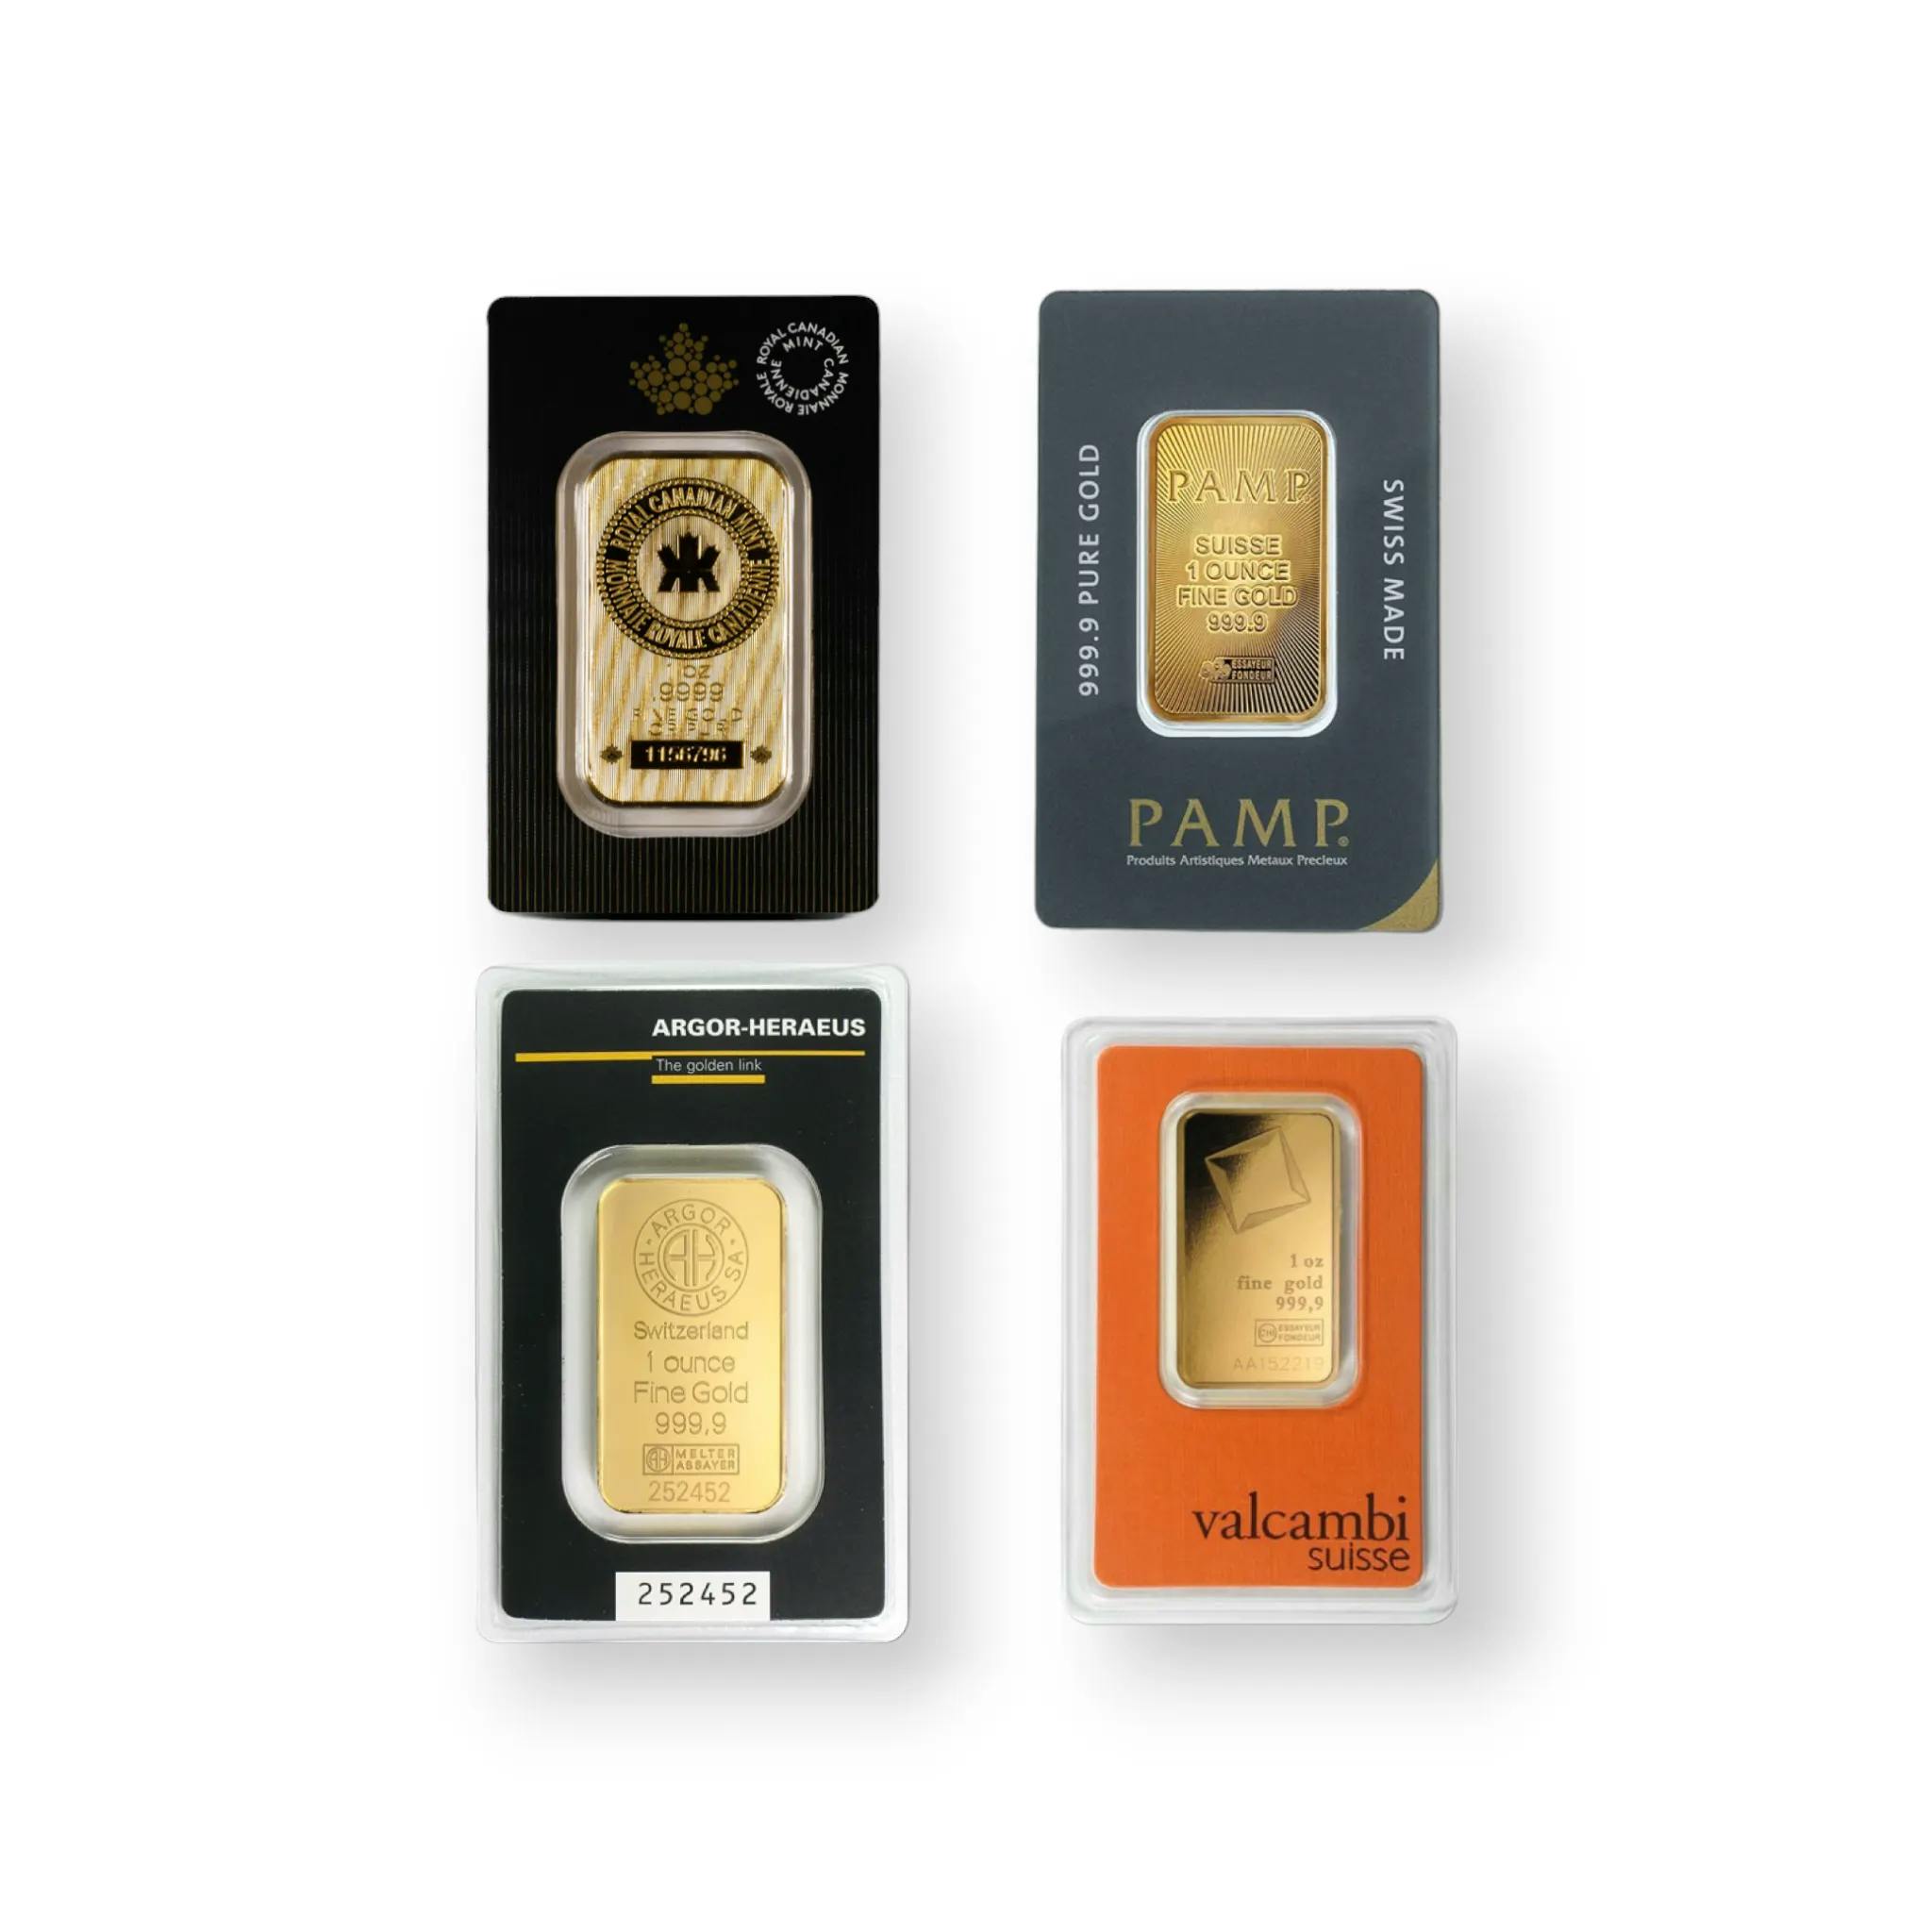 A picture of LBMA Gold Carded Bars.